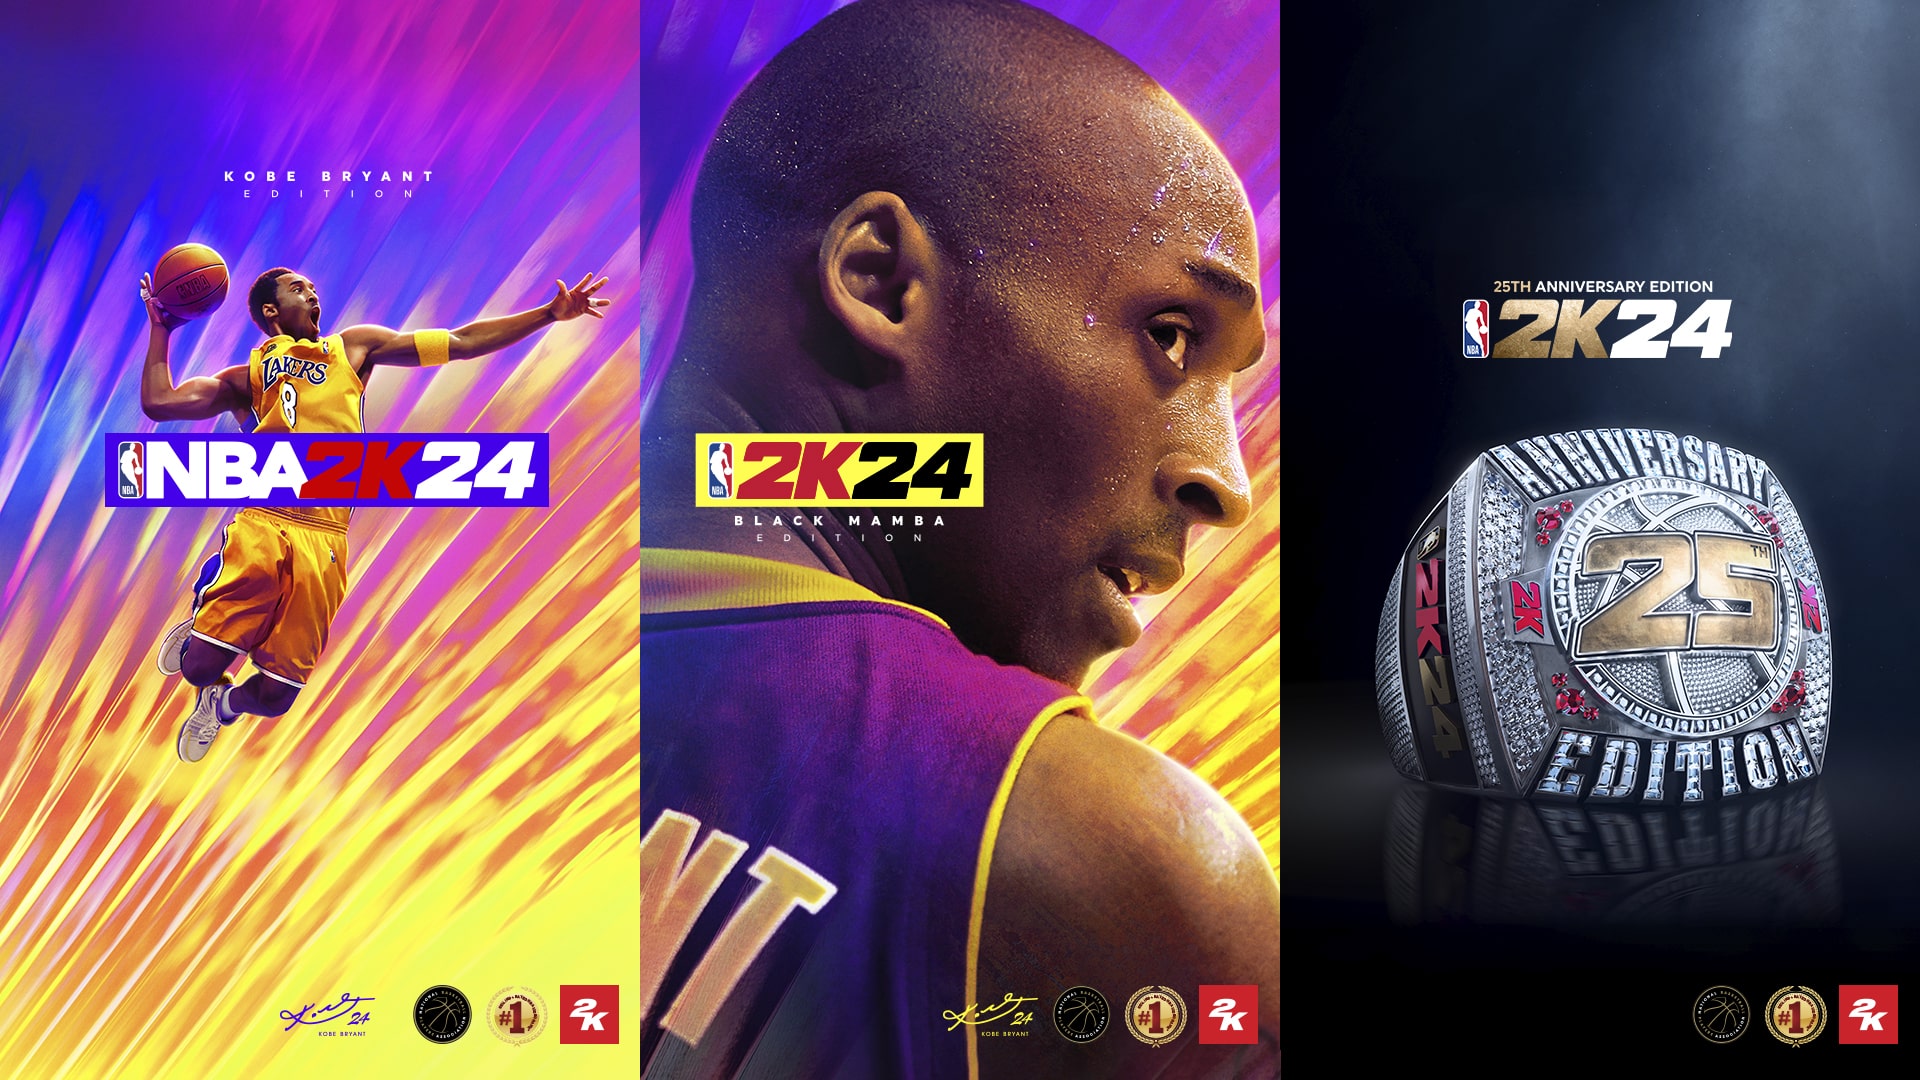 NBA 2k24 different editions